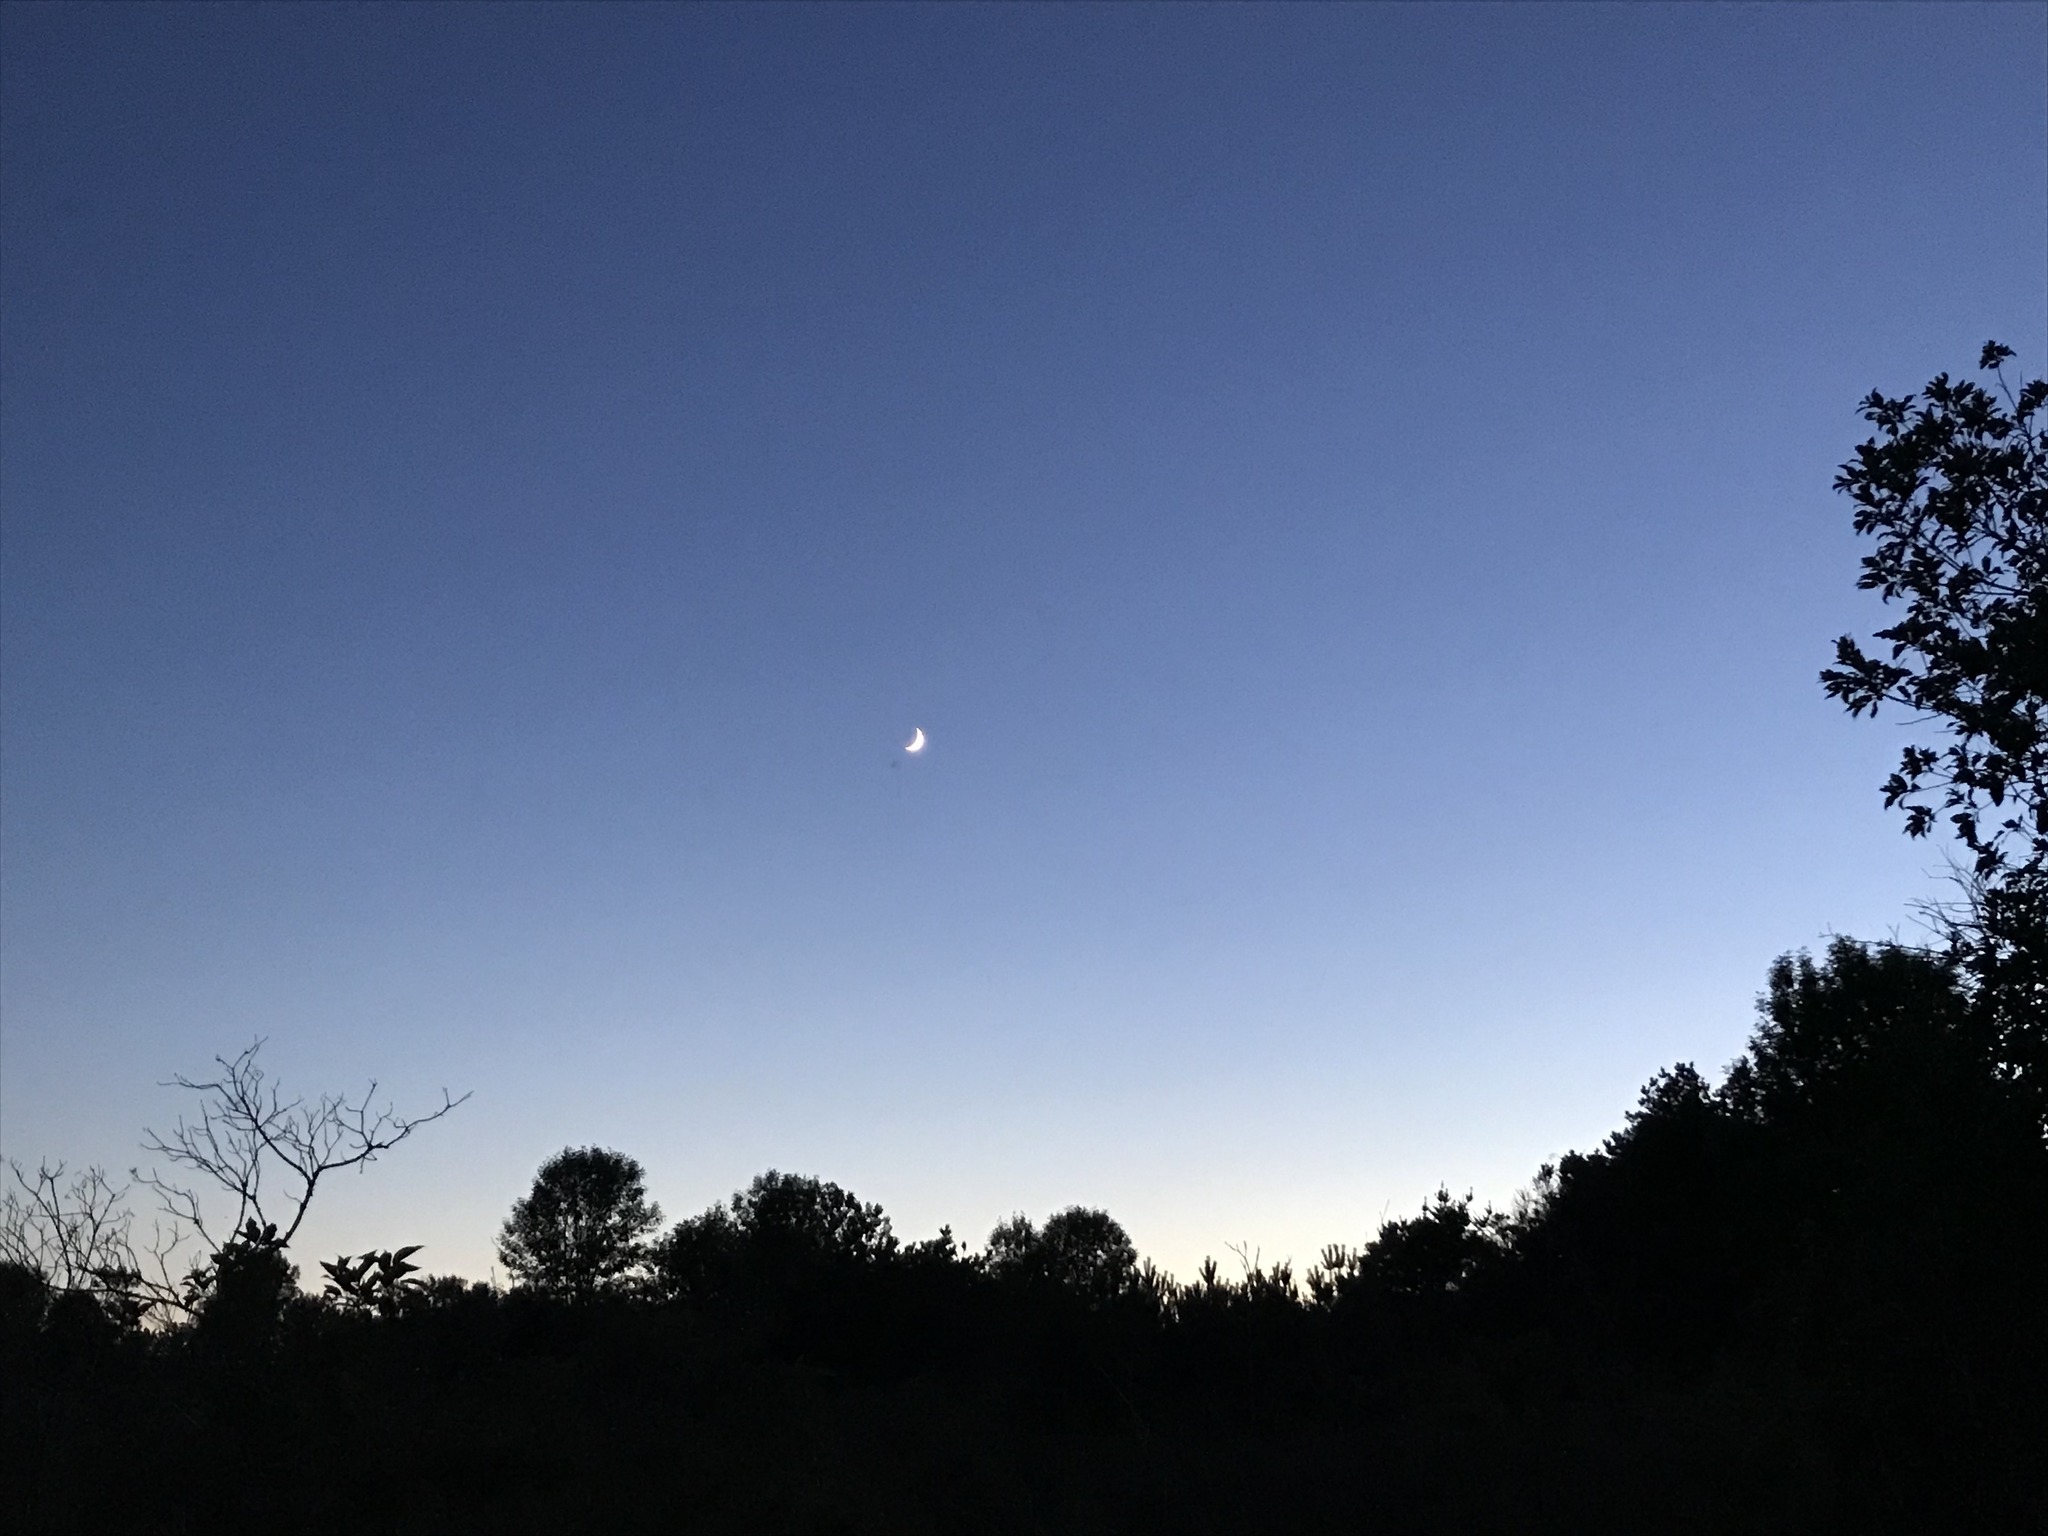 A crescent moon hanging in a blue sky at sundown with a silhouetted forest below.